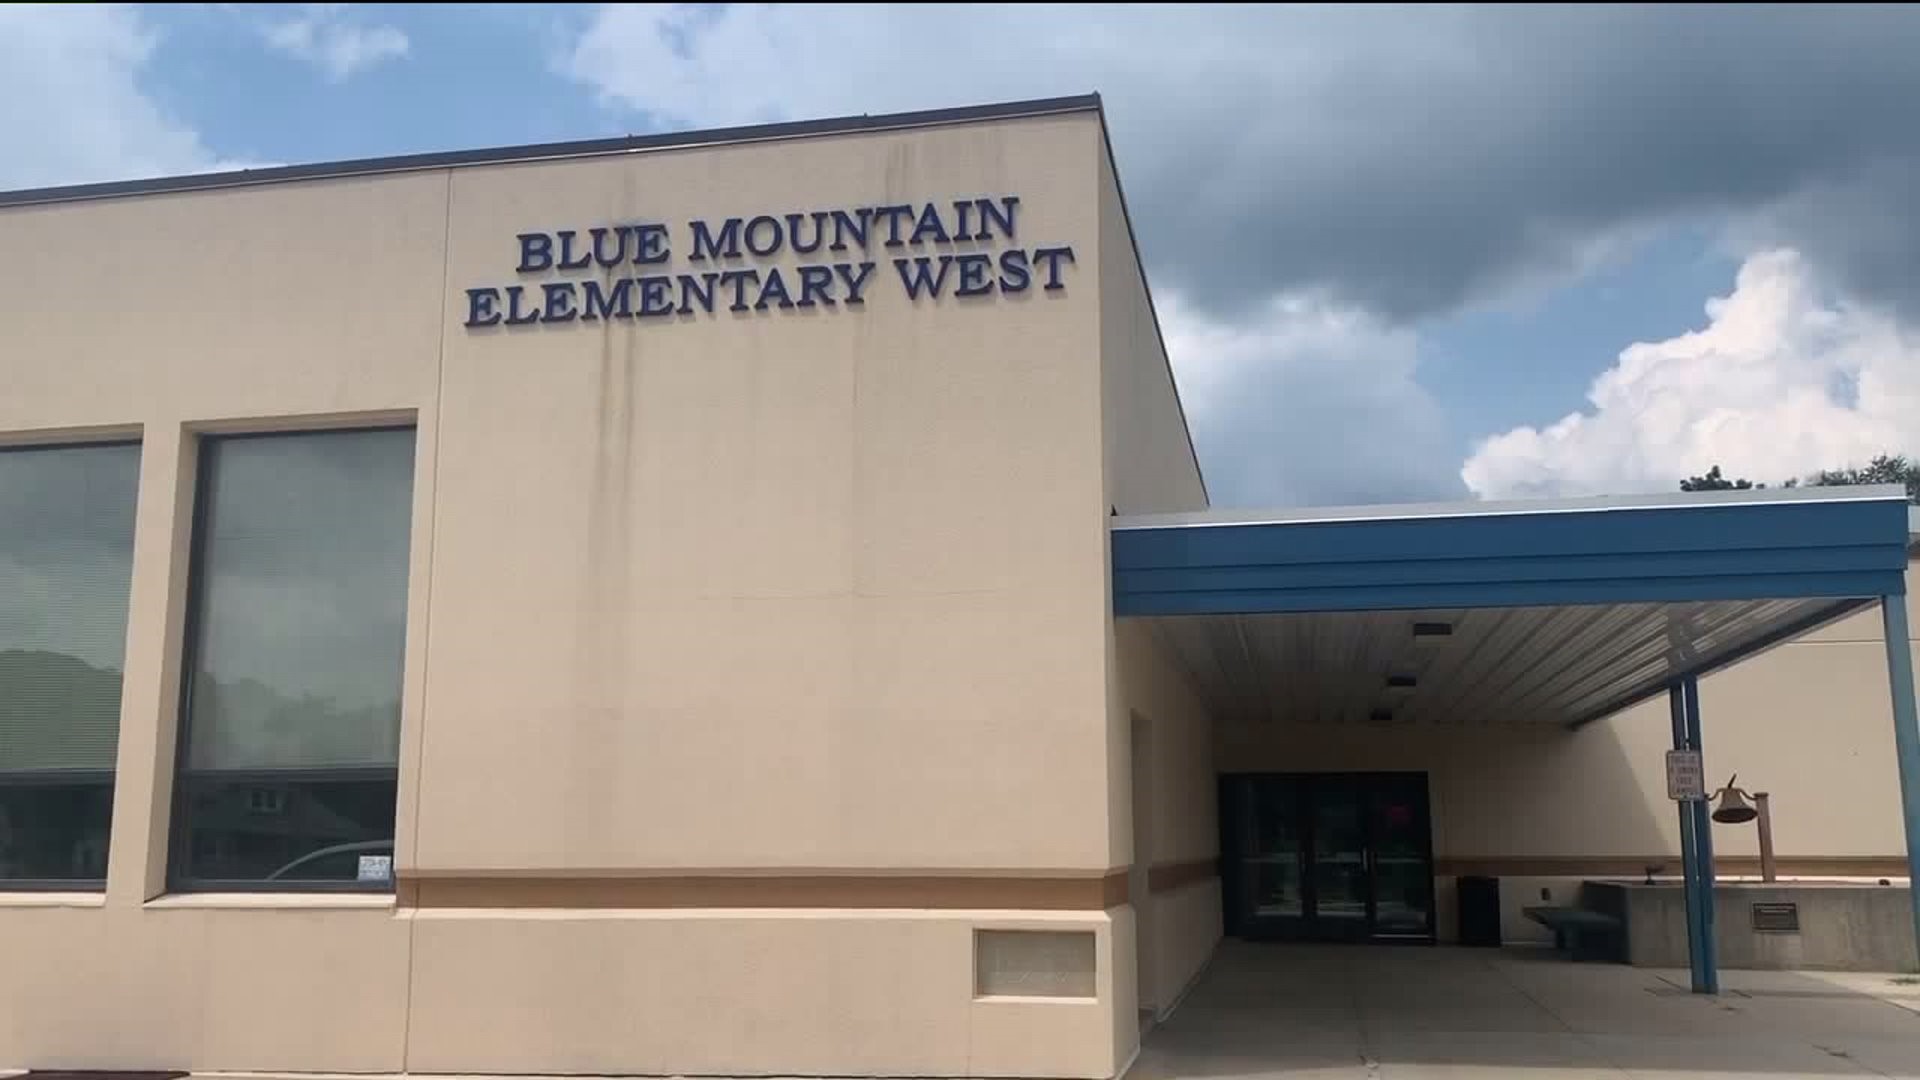 Delayed Opening for Blue Mountain Elementary West